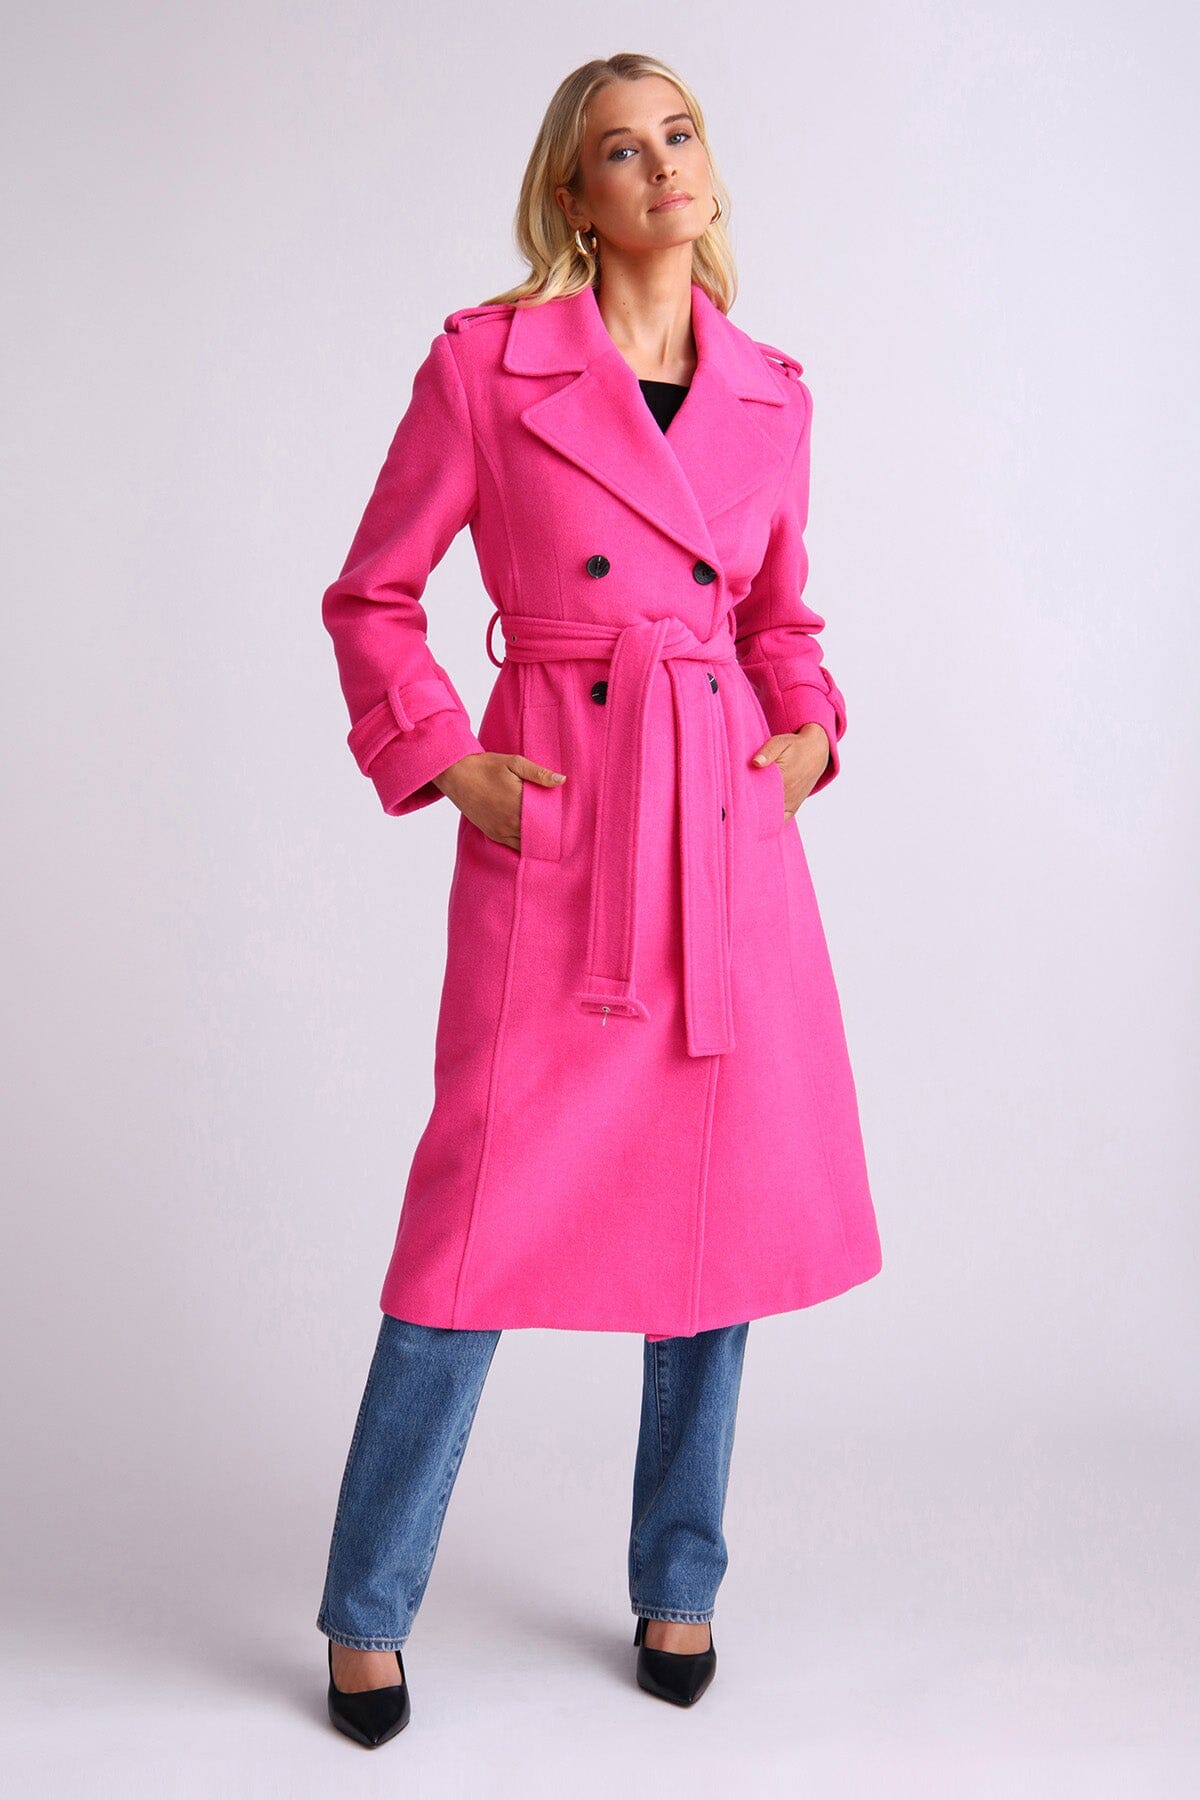 Long Length Vests Coats Jackets Puffers Trenches Outerwear